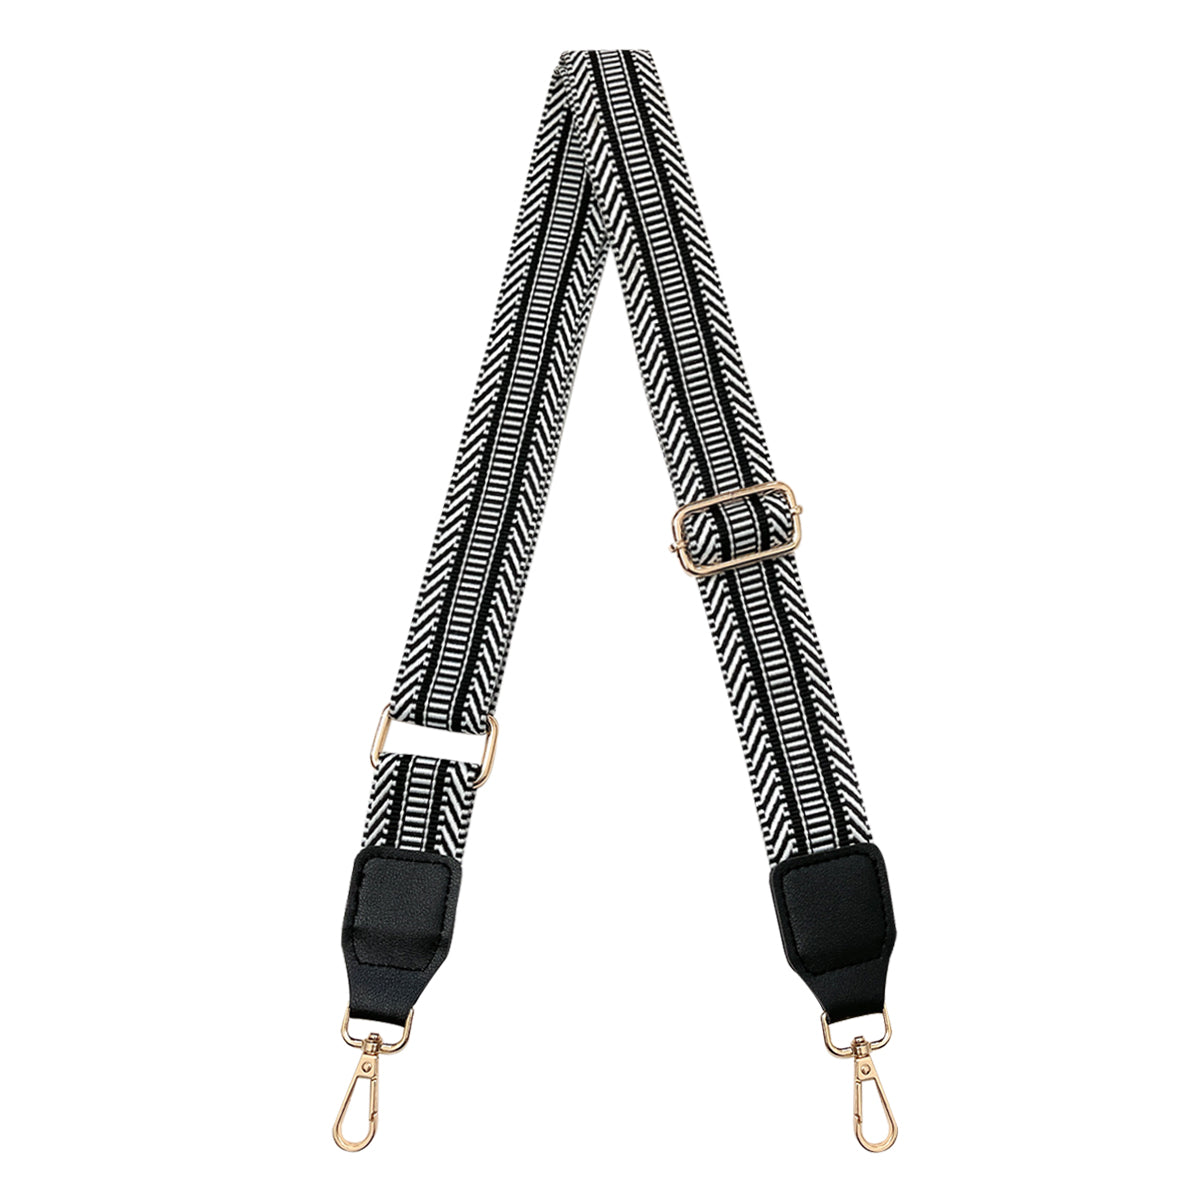 Adjustable Crossbody Strap for Purses Replacement Guitar